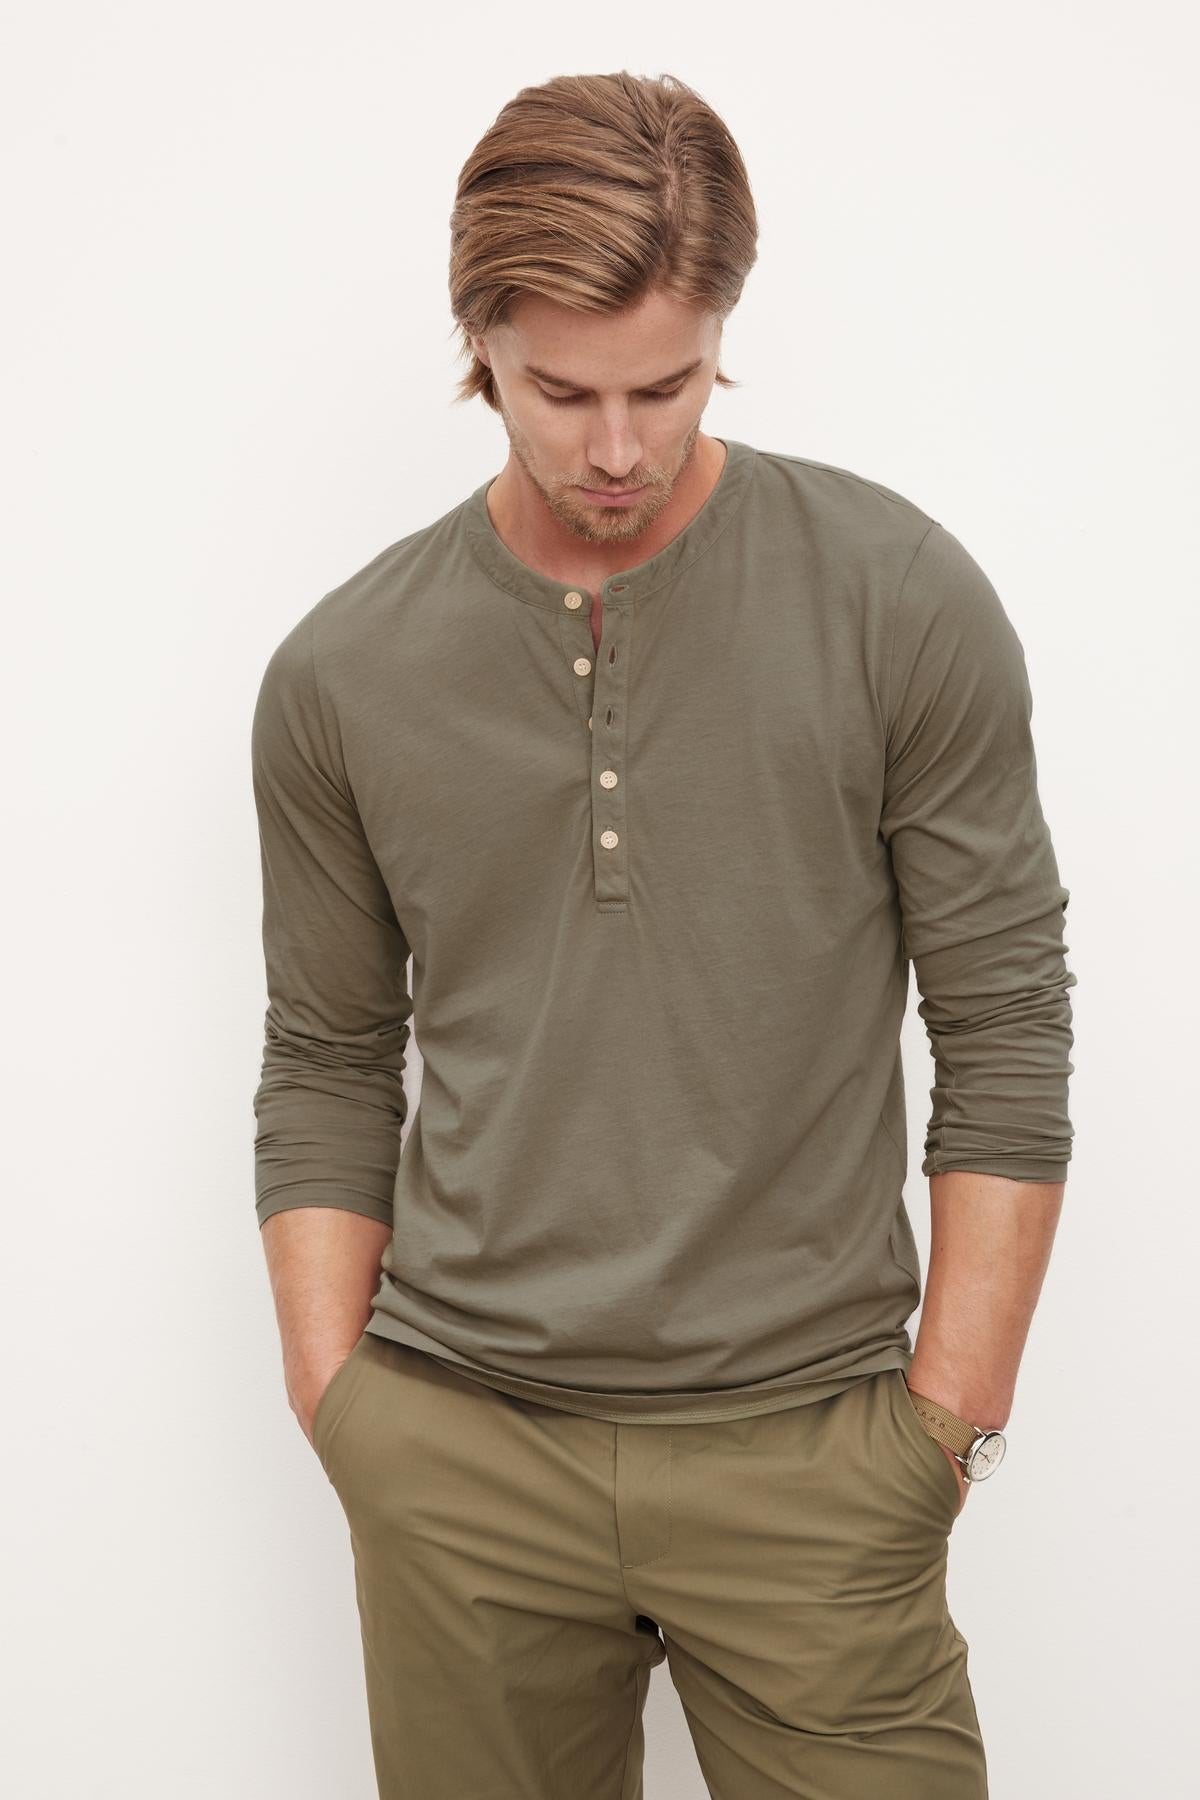 A man in a casual olive green Velvet by Graham & Spencer ALVARO COTTON JERSEY HENLEY shirt and matching pants with a vintage-look, looking down thoughtfully, with a wristwatch visible on his left arm.-36009056469185